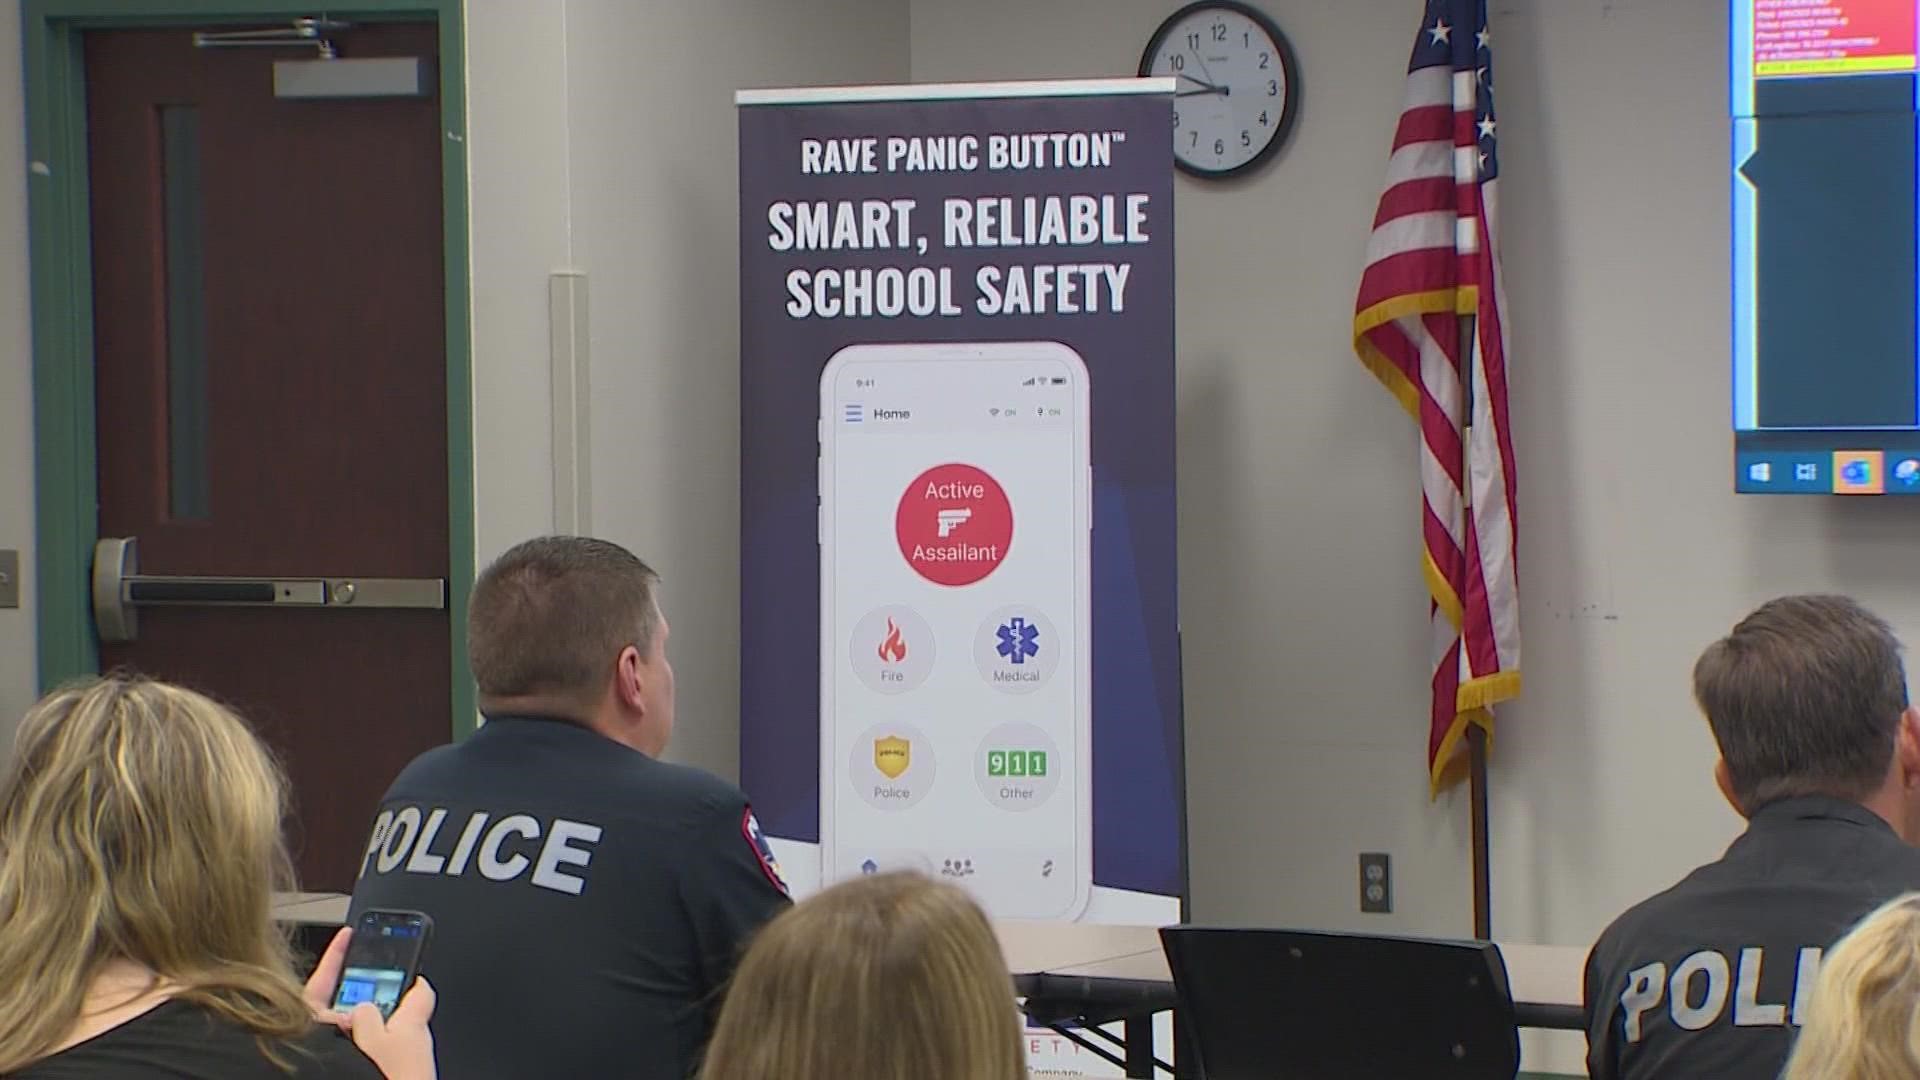 Montgomery County officials showed how a 'panic button' can be used in schools in the event of an emergency.